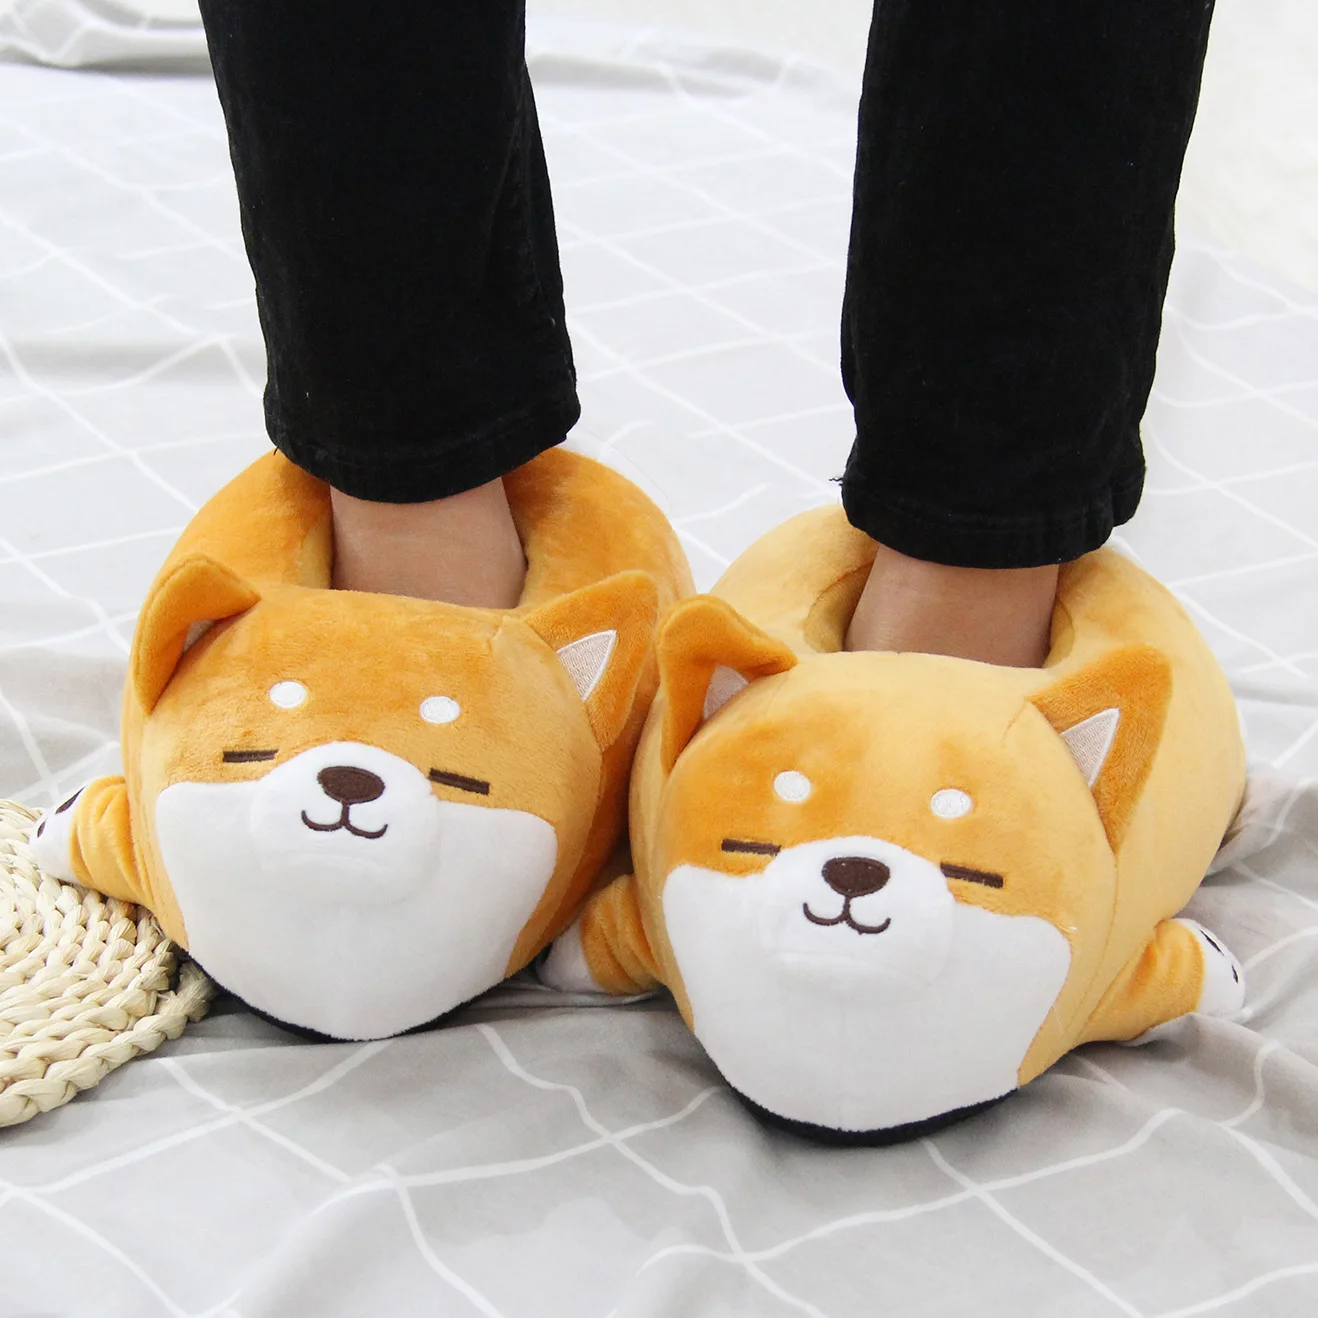 

Hot Shiba Inu Cartoon Slippers For Women Winter Plush Home Fluffy Cotton Shoes Slides House Indoor Animals Design Fuzzy Slipers